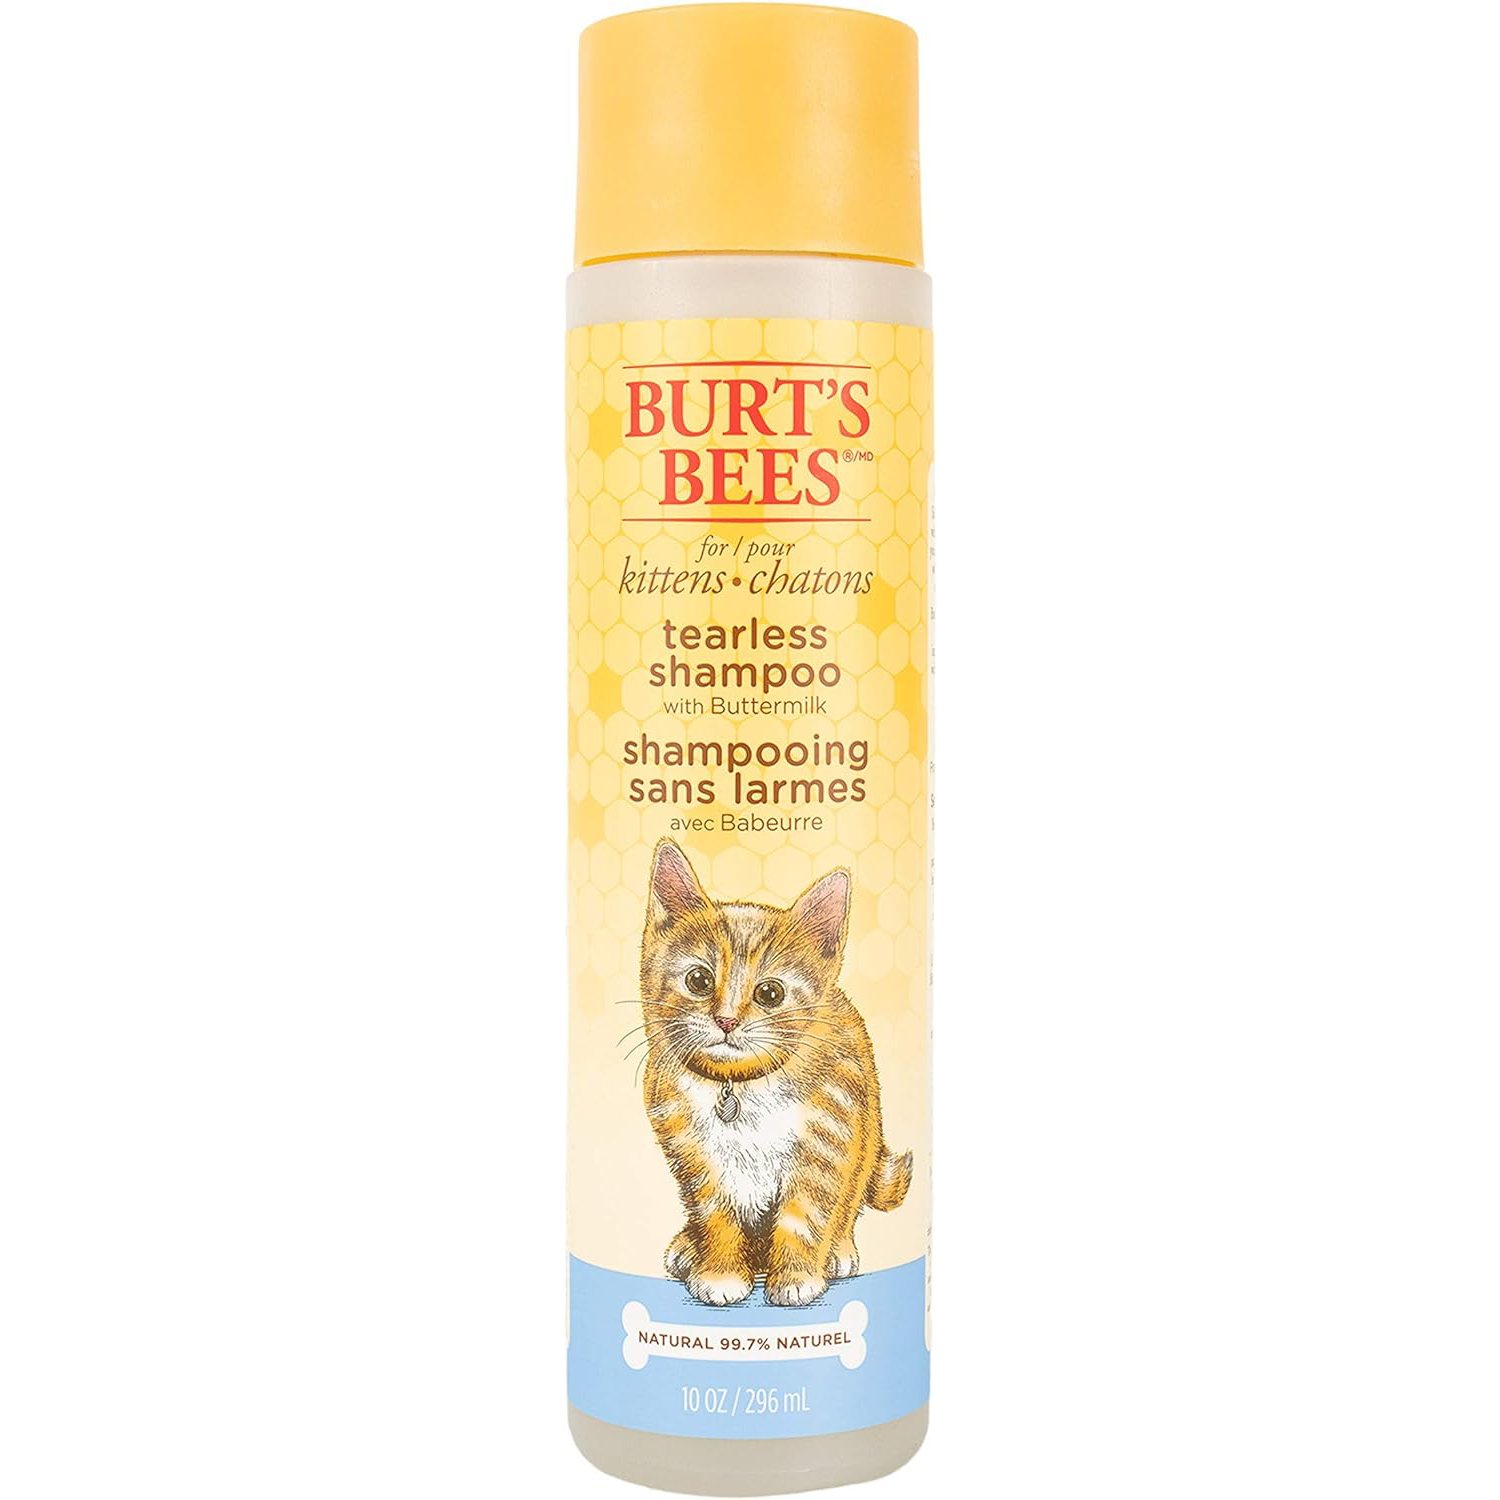 BURT_S BEES FOR PETS Kittens Natural Tearless Shampoo with Buttermilk, 10 Fl Oz - Kitten and Cat Grooming And Bath Supplies, Kitty Shampoo, Pet Shampoo for Cats new